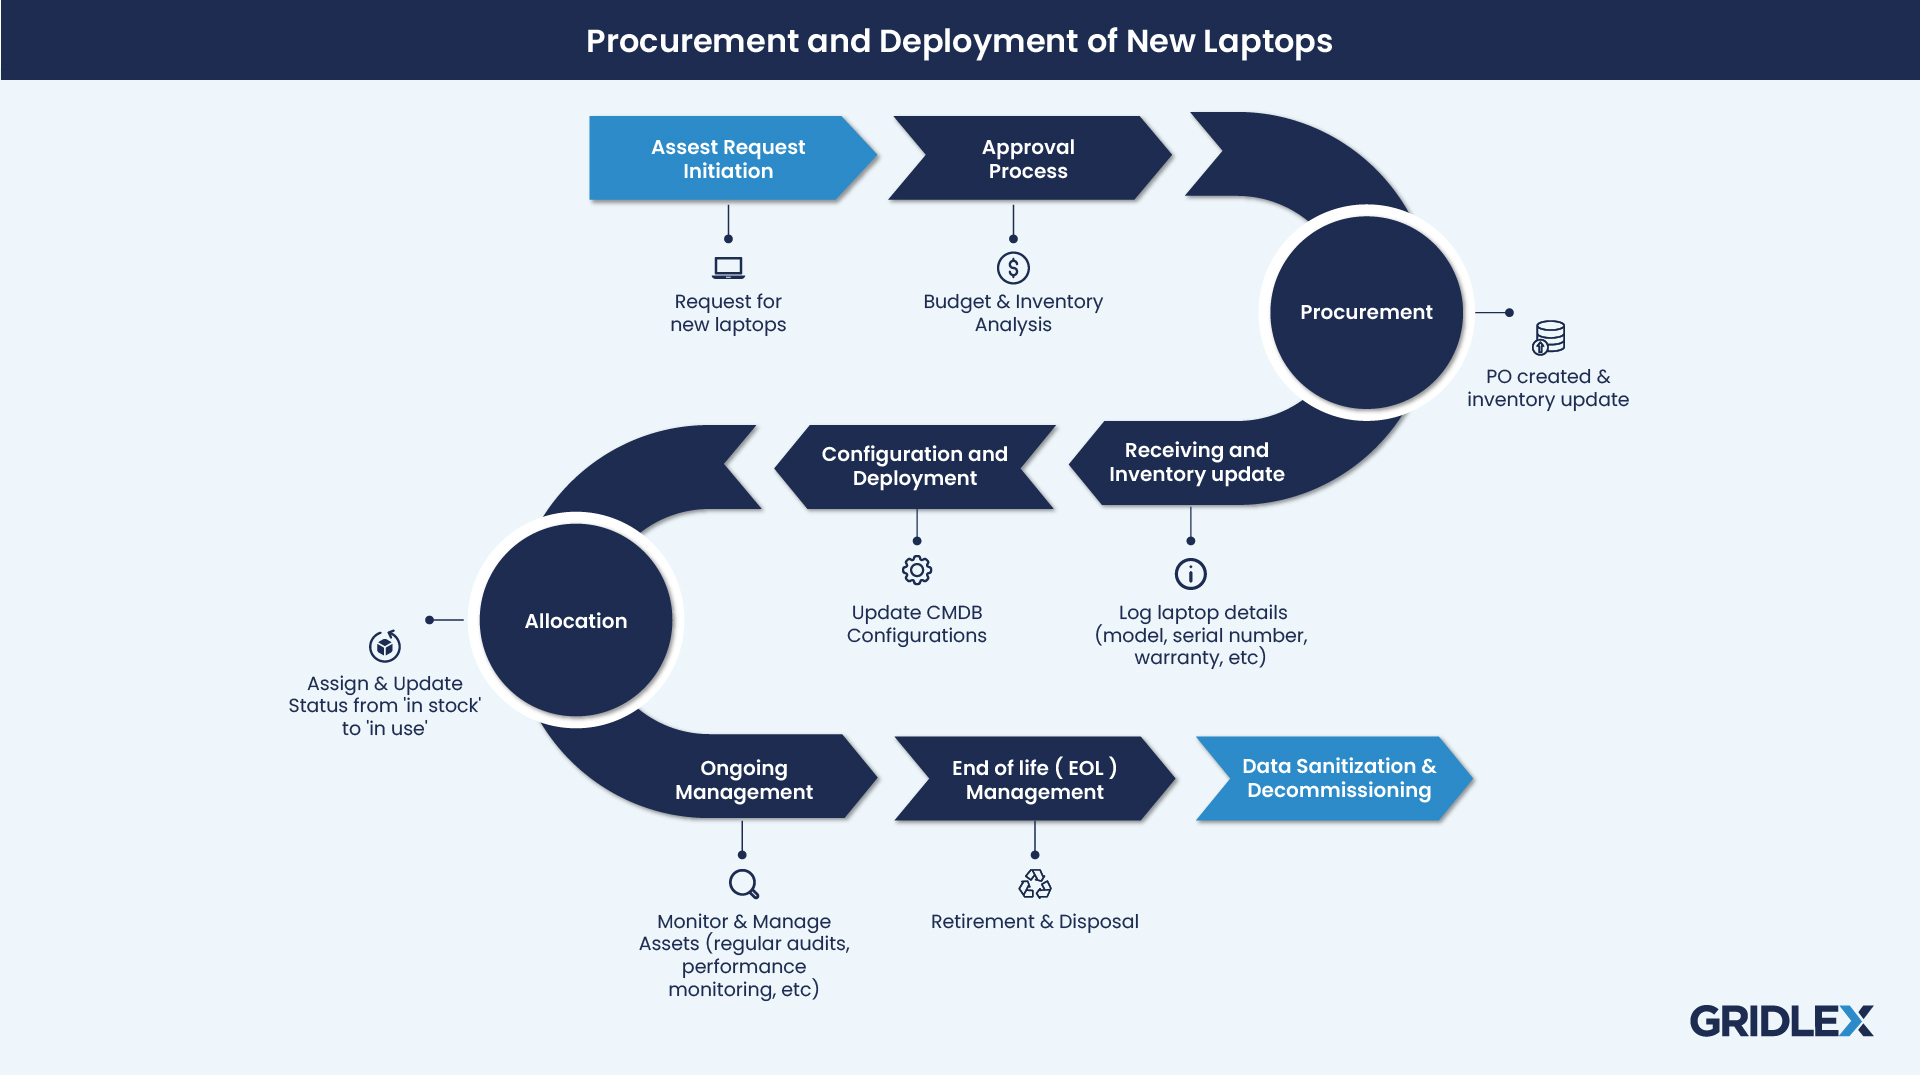 ITSM_Procurement_and_Deployment_of_New_Laptops